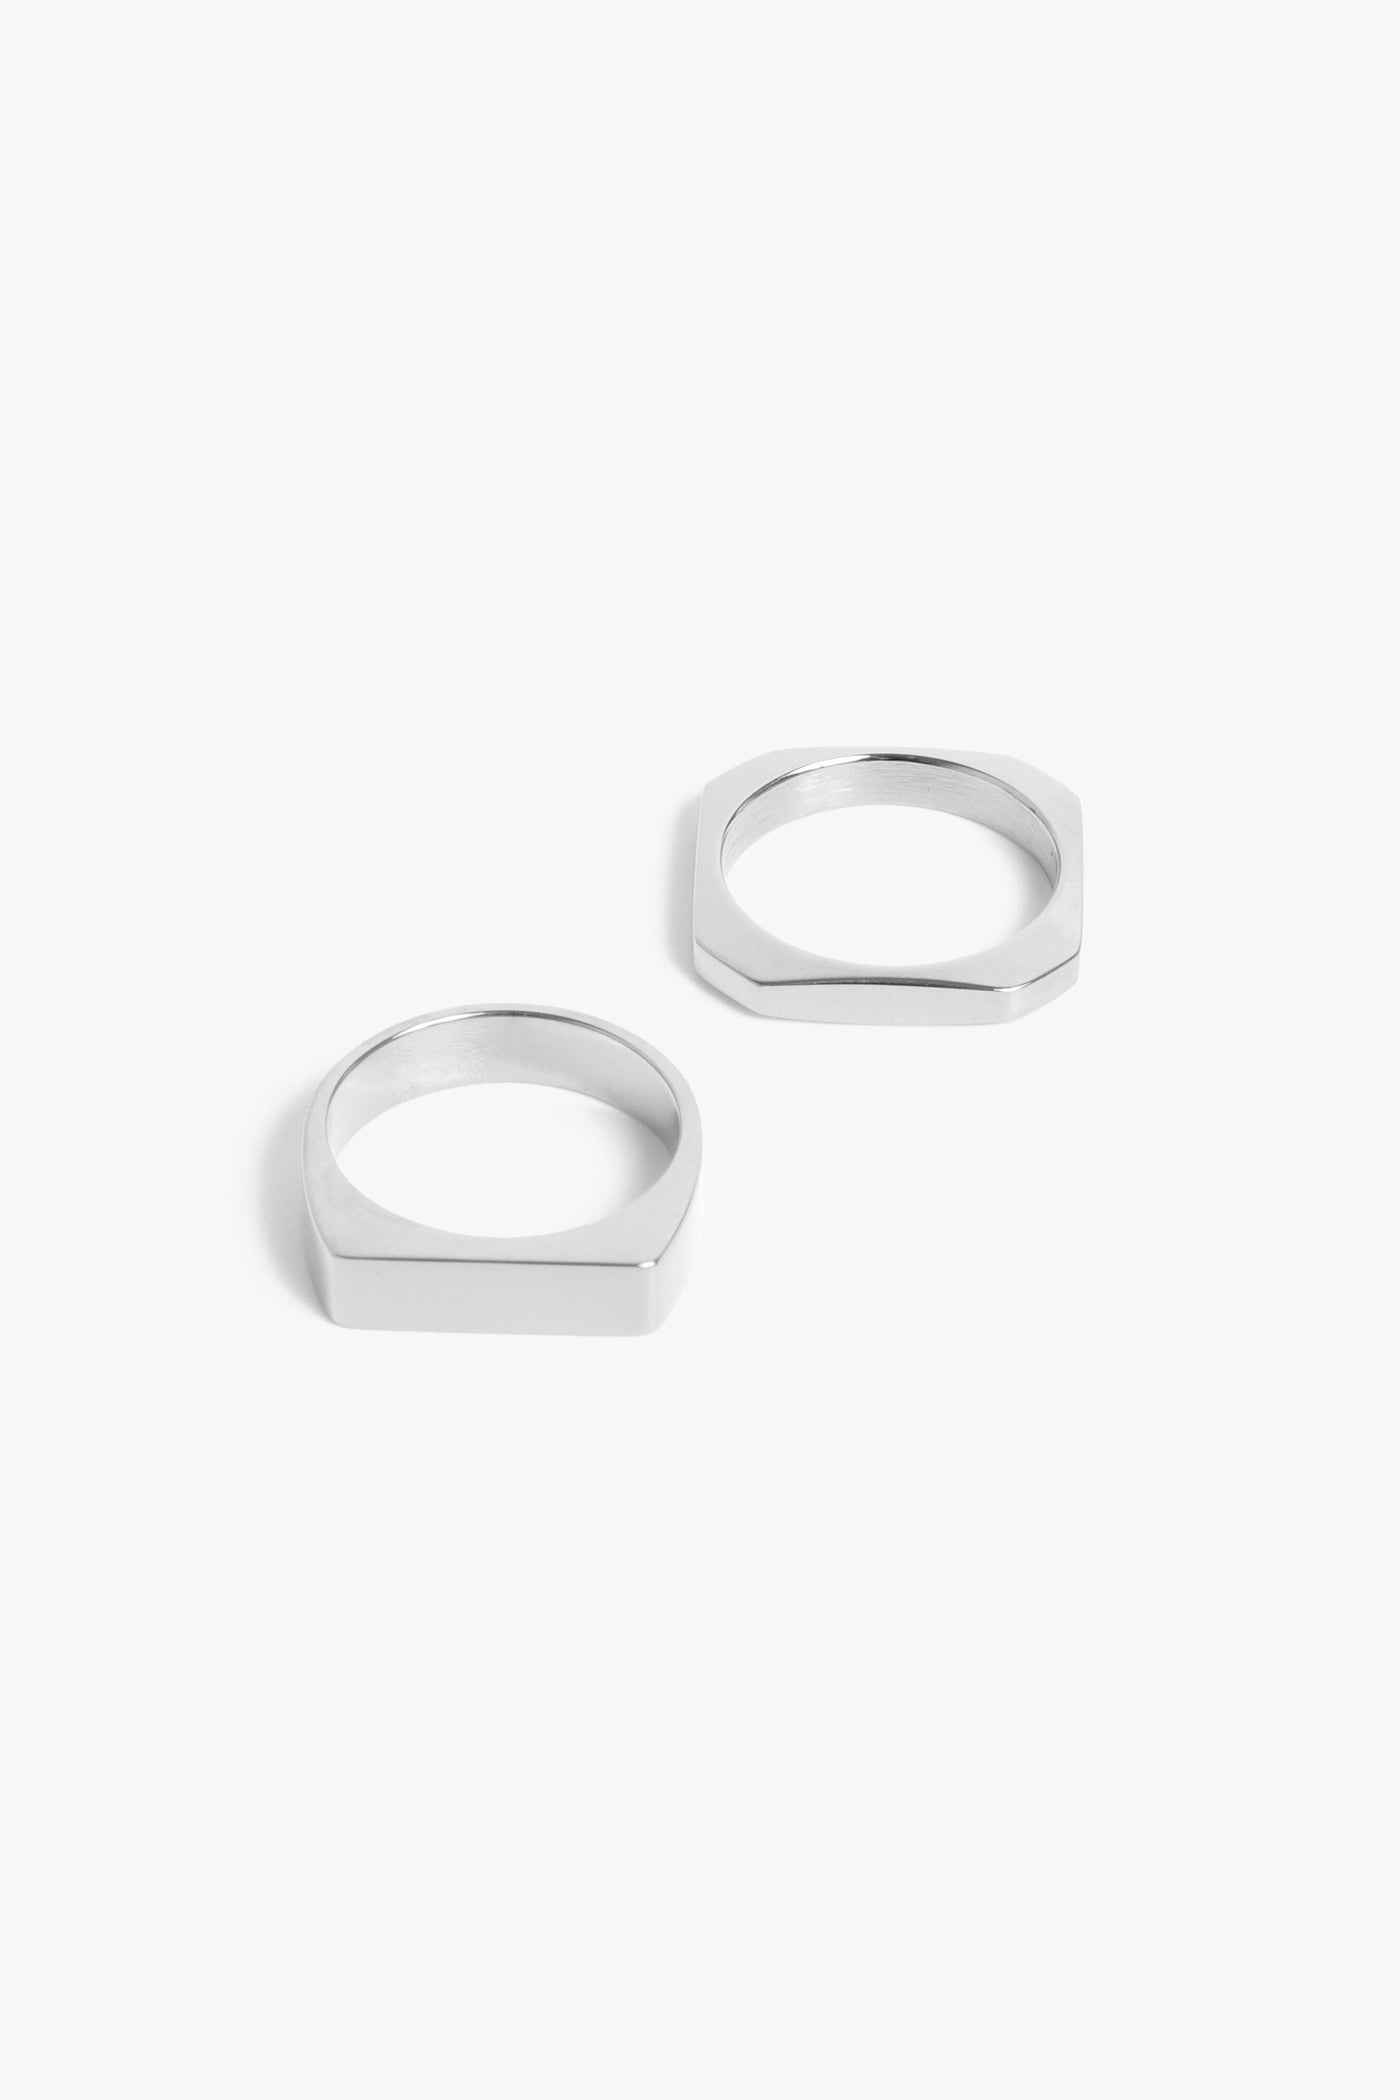 Marrin Costello Jewelry Hendrix Stack geometric signet and quad 2 for 1 ring. Available in sizes 6, 7, 8. Waterproof, sustainable, hypoallergenic. Polished stainless steel.